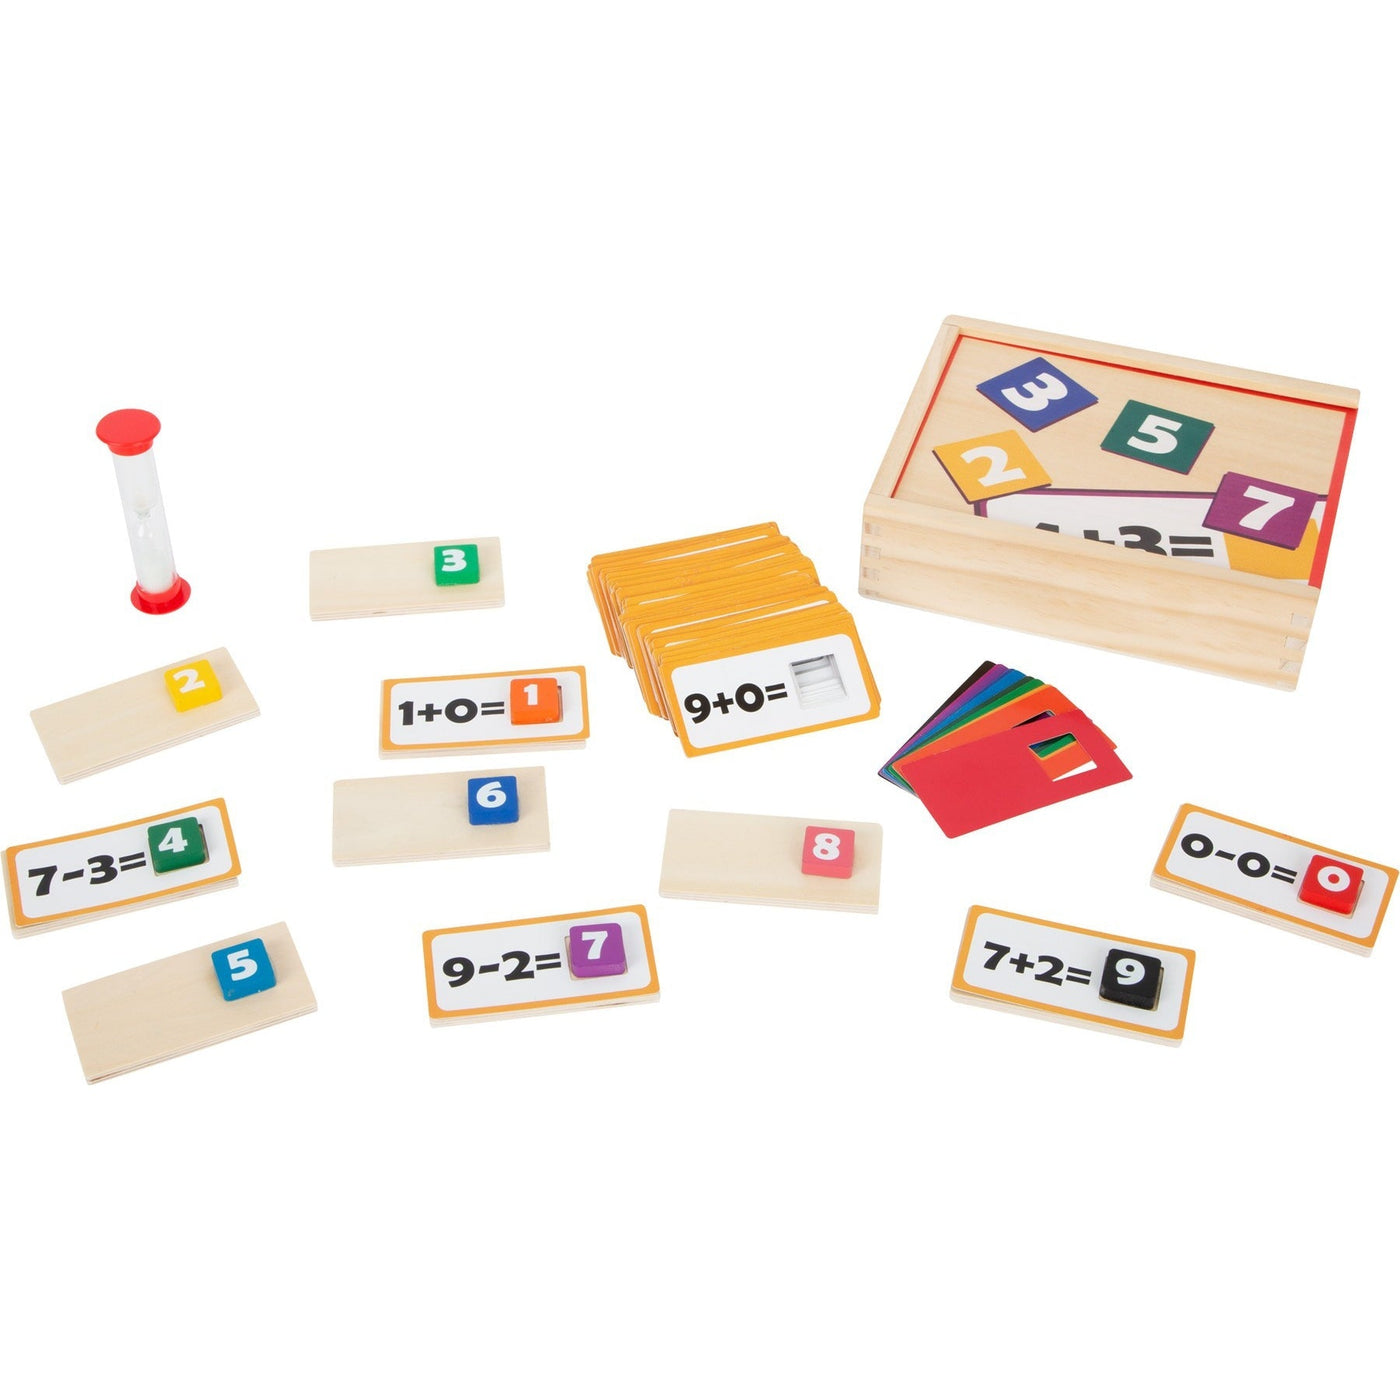 Wooden Mathematics Learning Puzzle